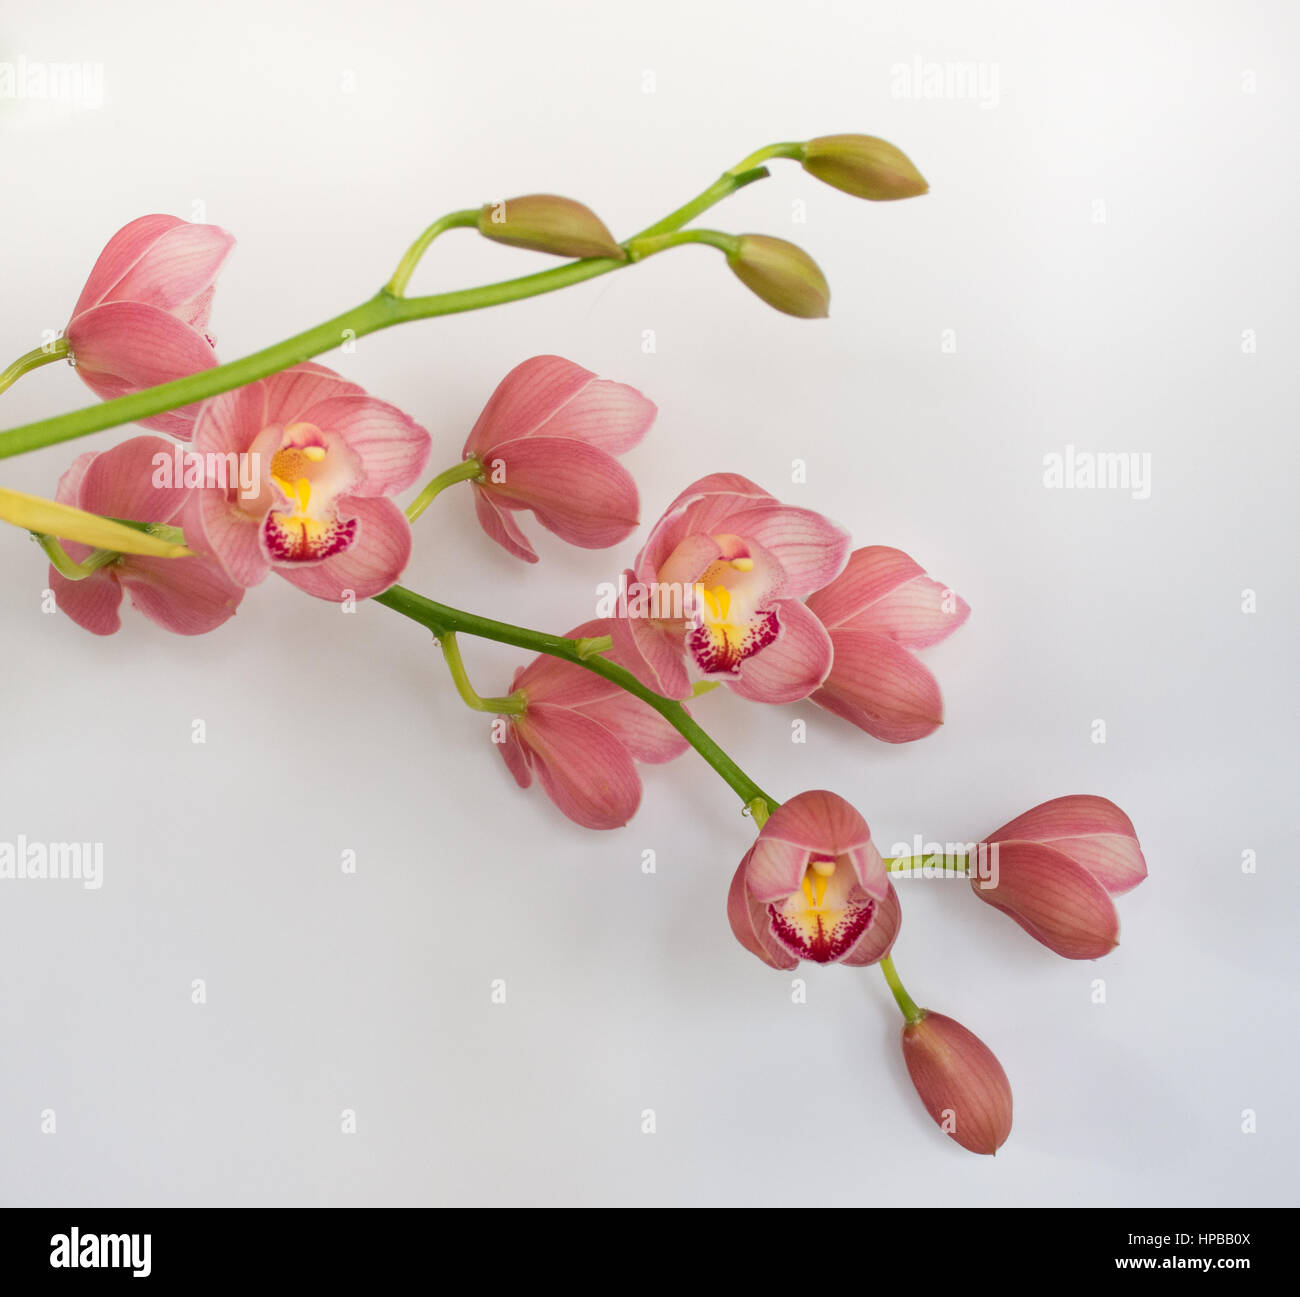 Close up of Cattleya orchid stems with coral pink blossoms and buds against a white background. Shallow depth of field. Copy space. Stock Photo